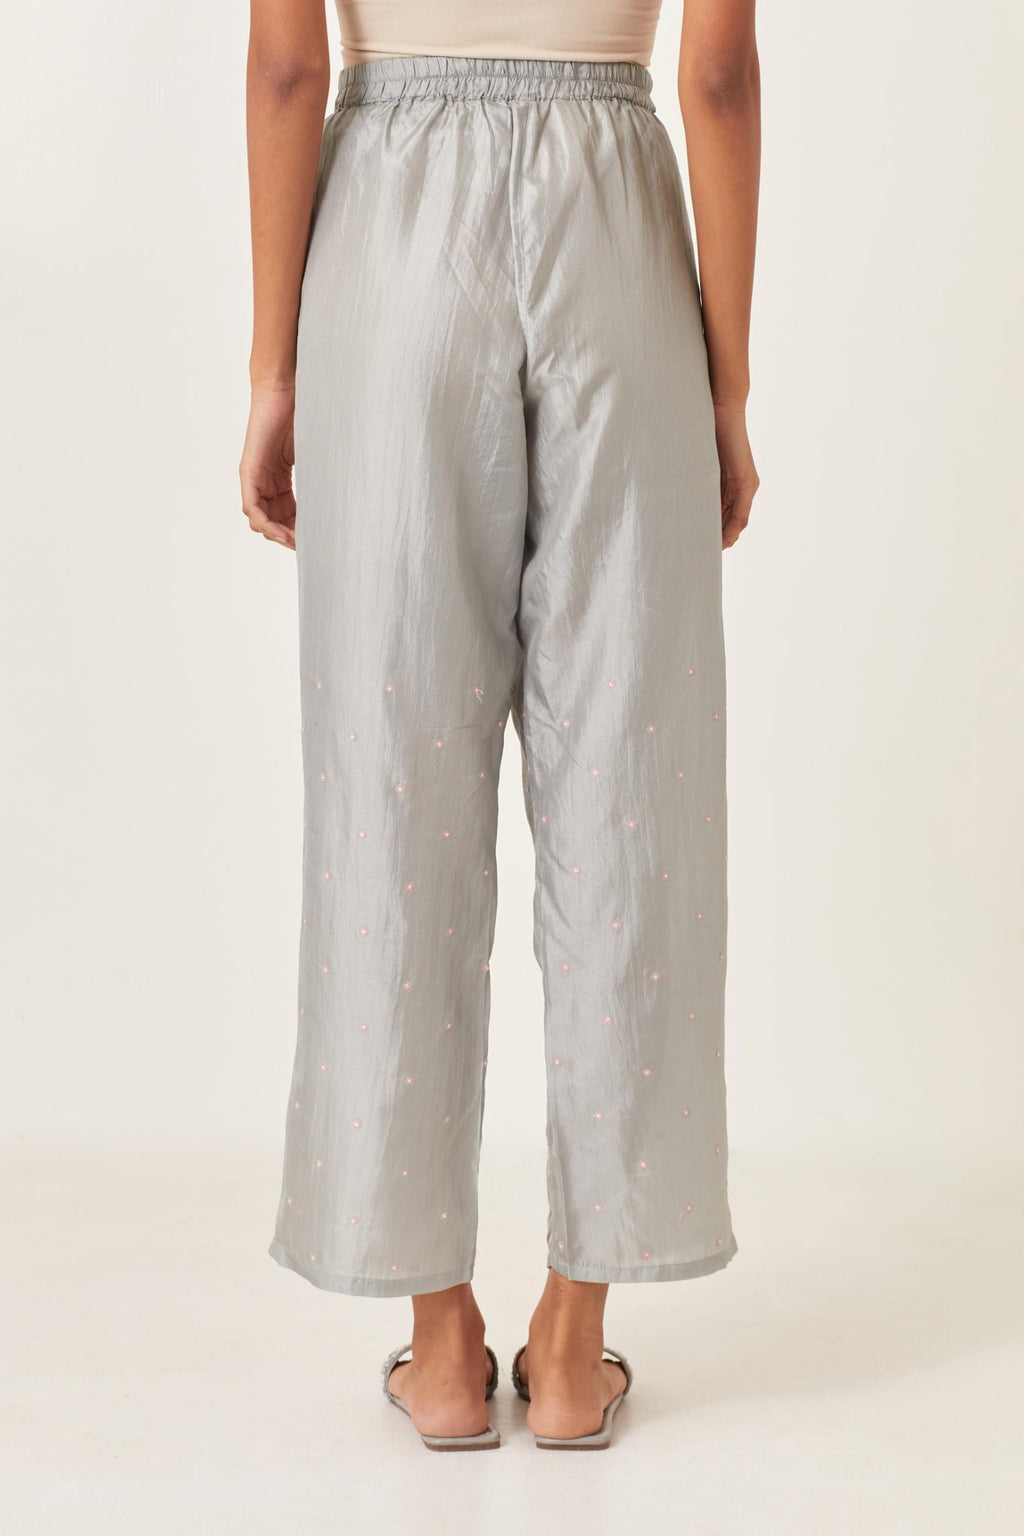 Blue silk straight pants detailed with small flower embroidery at bottom.